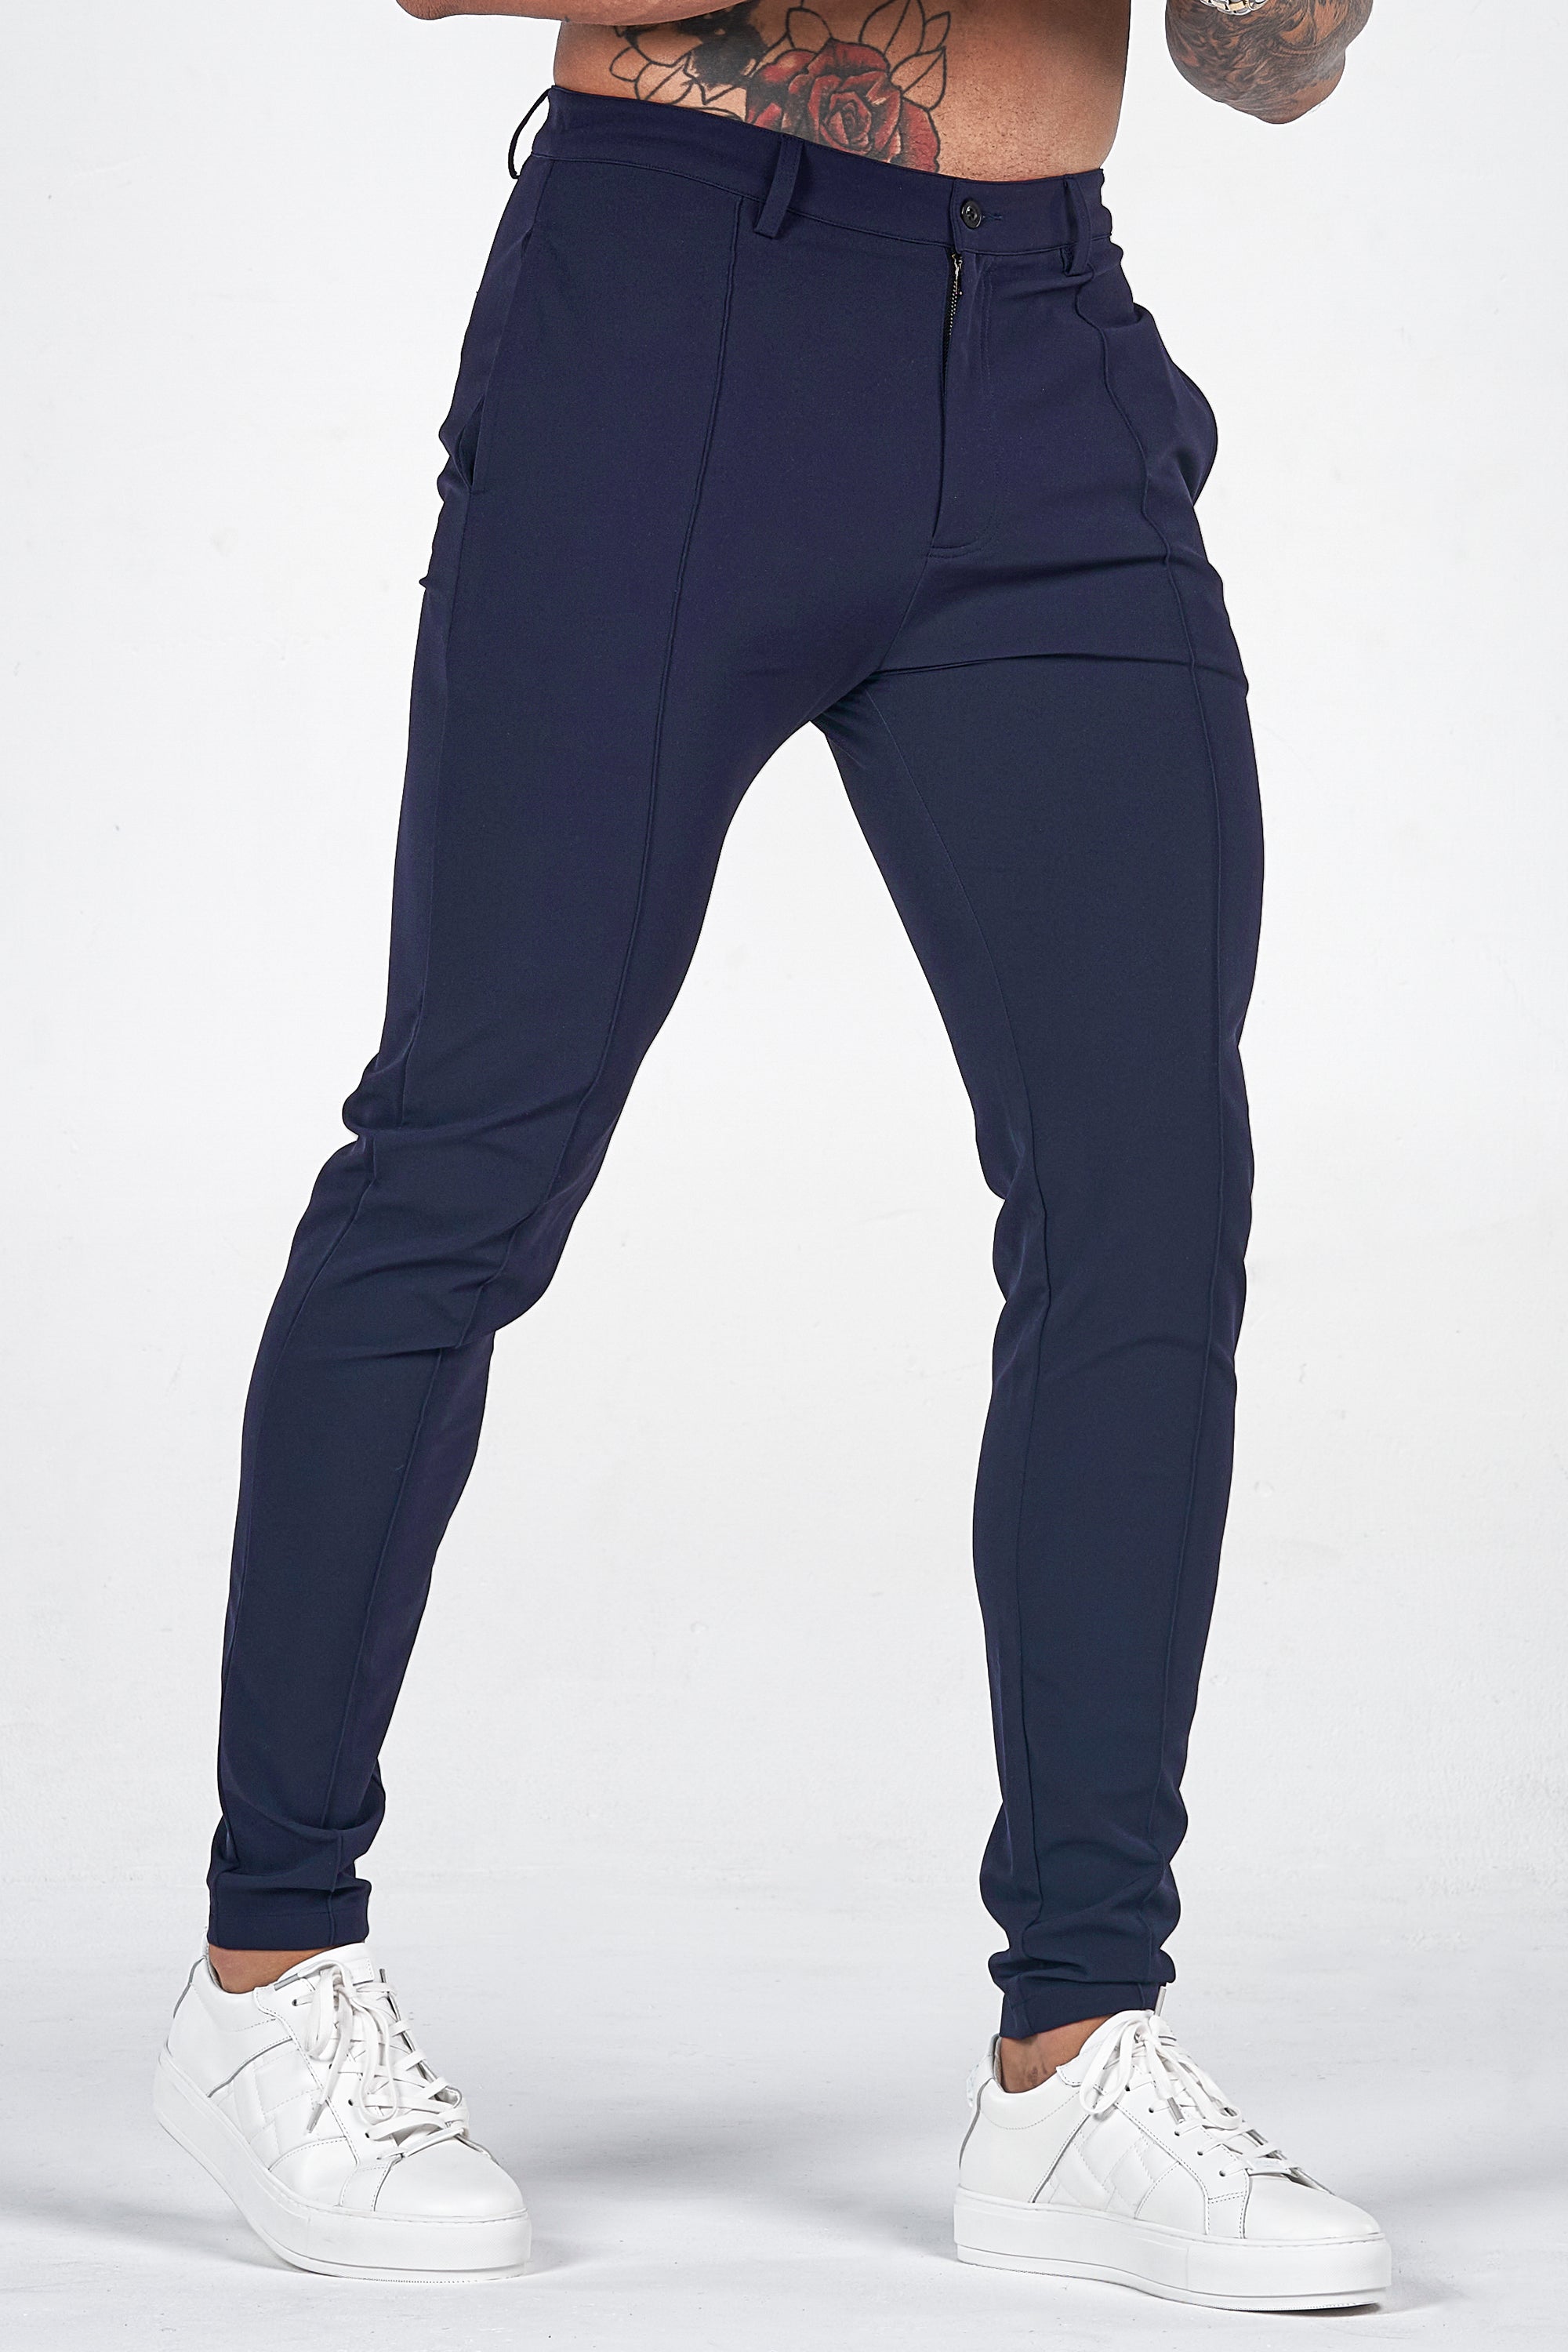 THE VOCO TROUSERS 2.0 - NAVY BLUE - ICON. AMSTERDAM